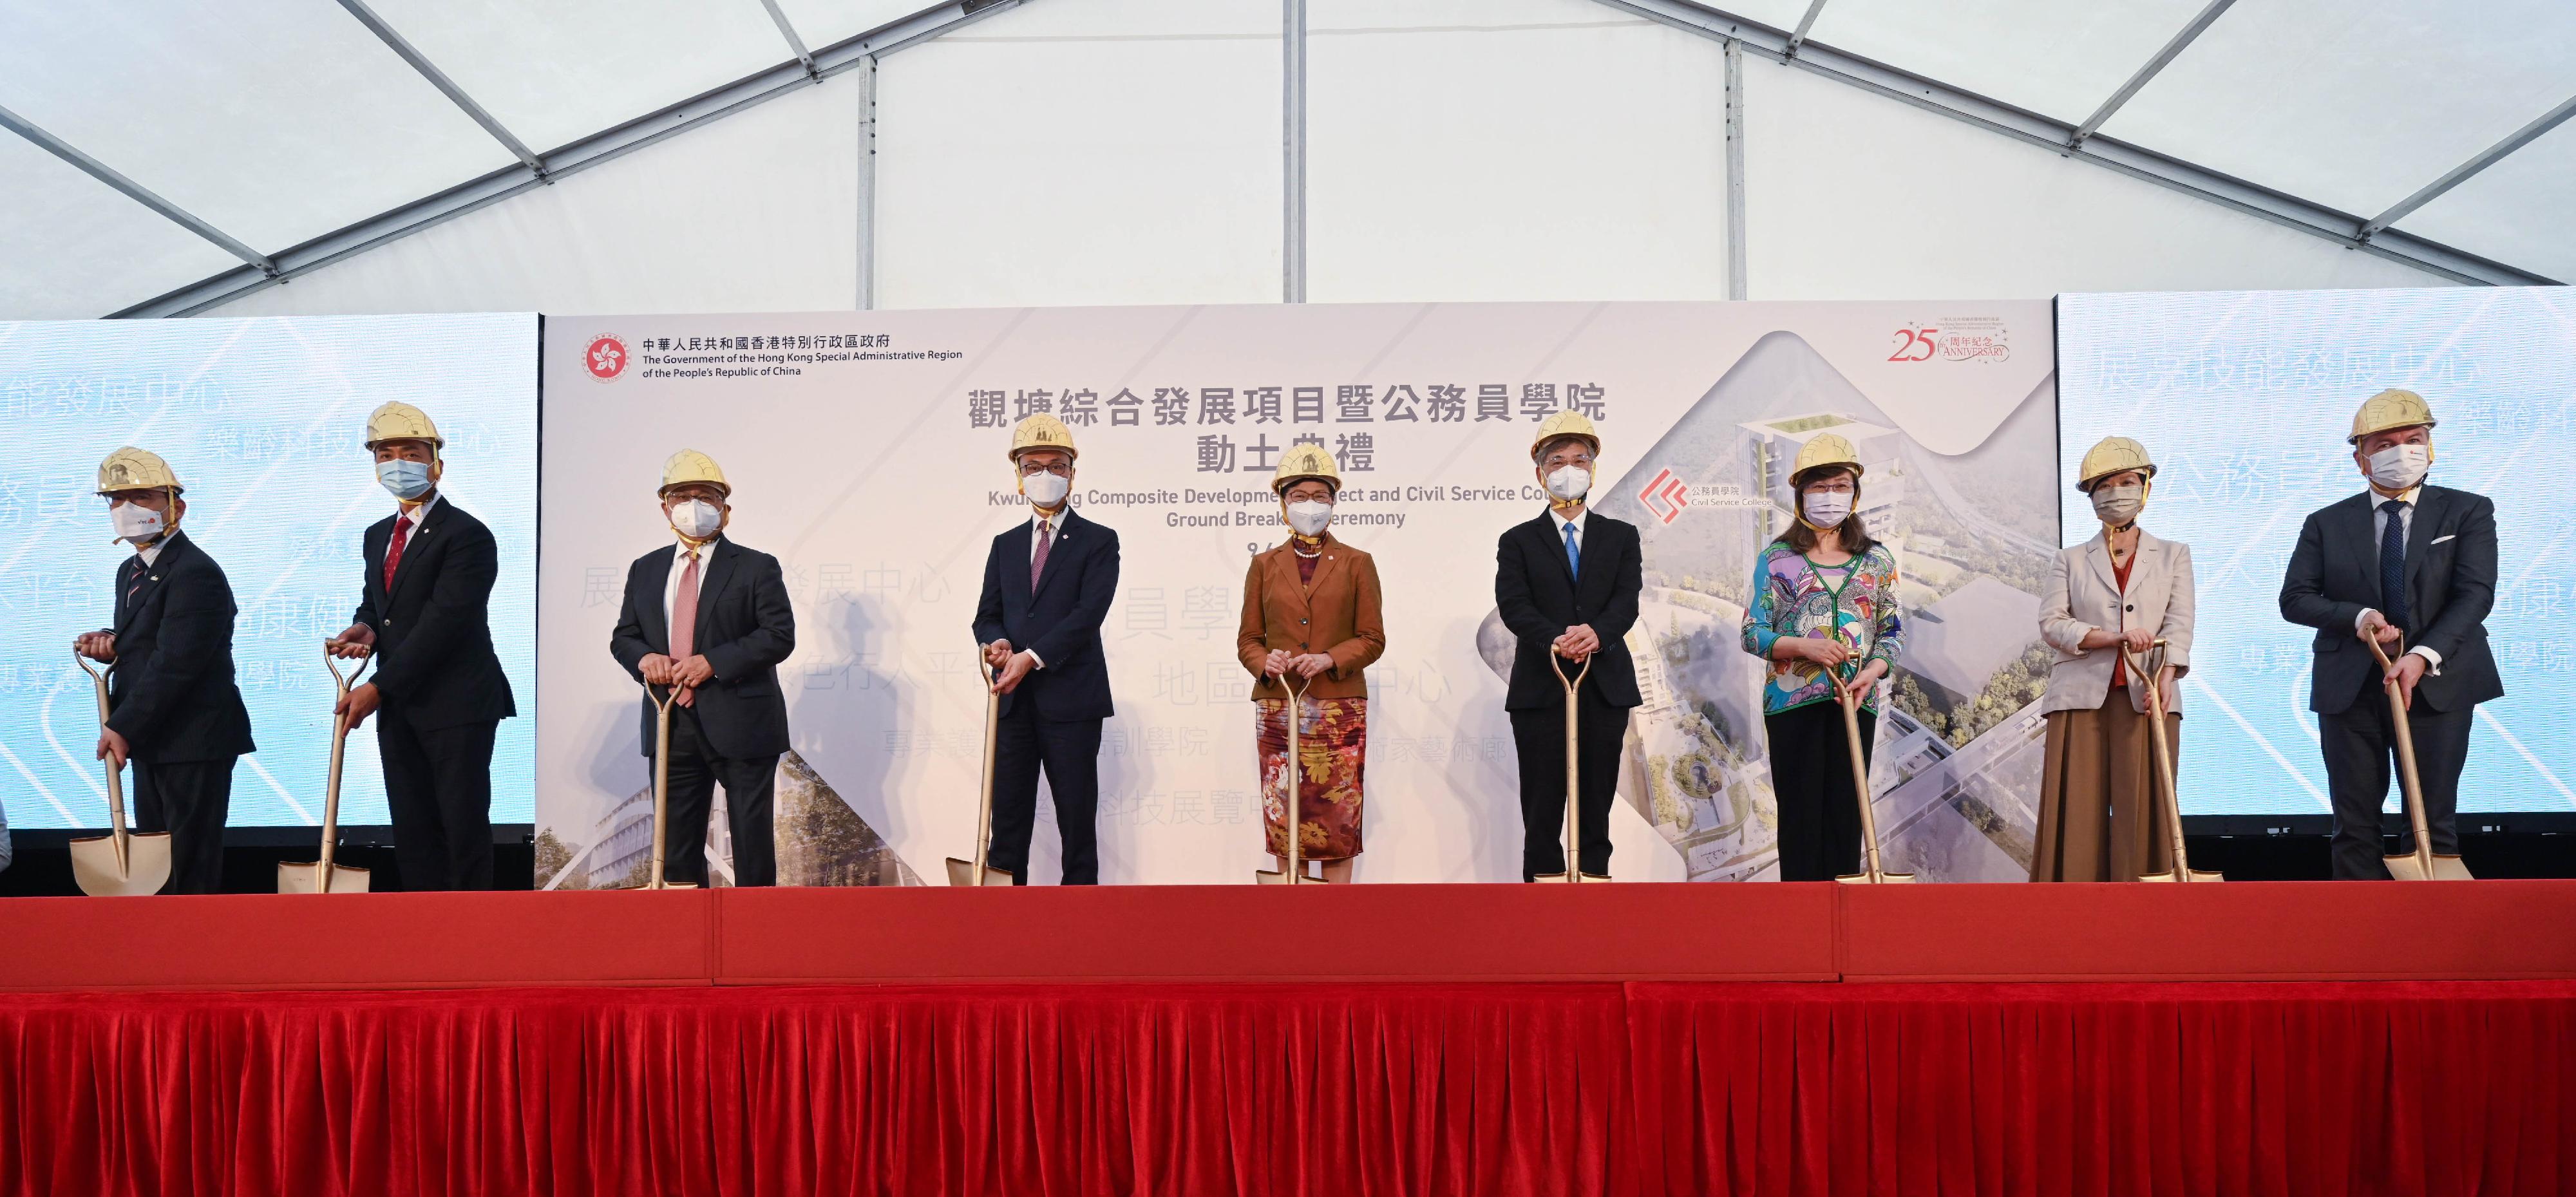 The Chief Executive, Mrs Carrie Lam, officiated at the Kwun Tong Composite Development Project and Civil Service College Ground Breaking Ceremony this afternoon (June 9). Photo shows (from left) the Executive Director of the Vocational Training Council, Mr Donald Tong; the Head of the Civil Service College (Designate), Mr Kwok Yam-shu; the Chairman of the Civil Service Training Advisory Board, Dr Victor Fung; the Secretary for the Civil Service, Mr Patrick Nip; Mrs Lam; the Secretary for Labour and Welfare, Dr Law Chi-kwong; the Permanent Secretary for the Civil Service, Mrs Ingrid Yeung; the Director of Architectural Services, Ms Winnie Ho; and the Chief Executive of Gammon Construction Limited, Mr Kevin O'Brien, officiating at the Ground Breaking Ceremony.